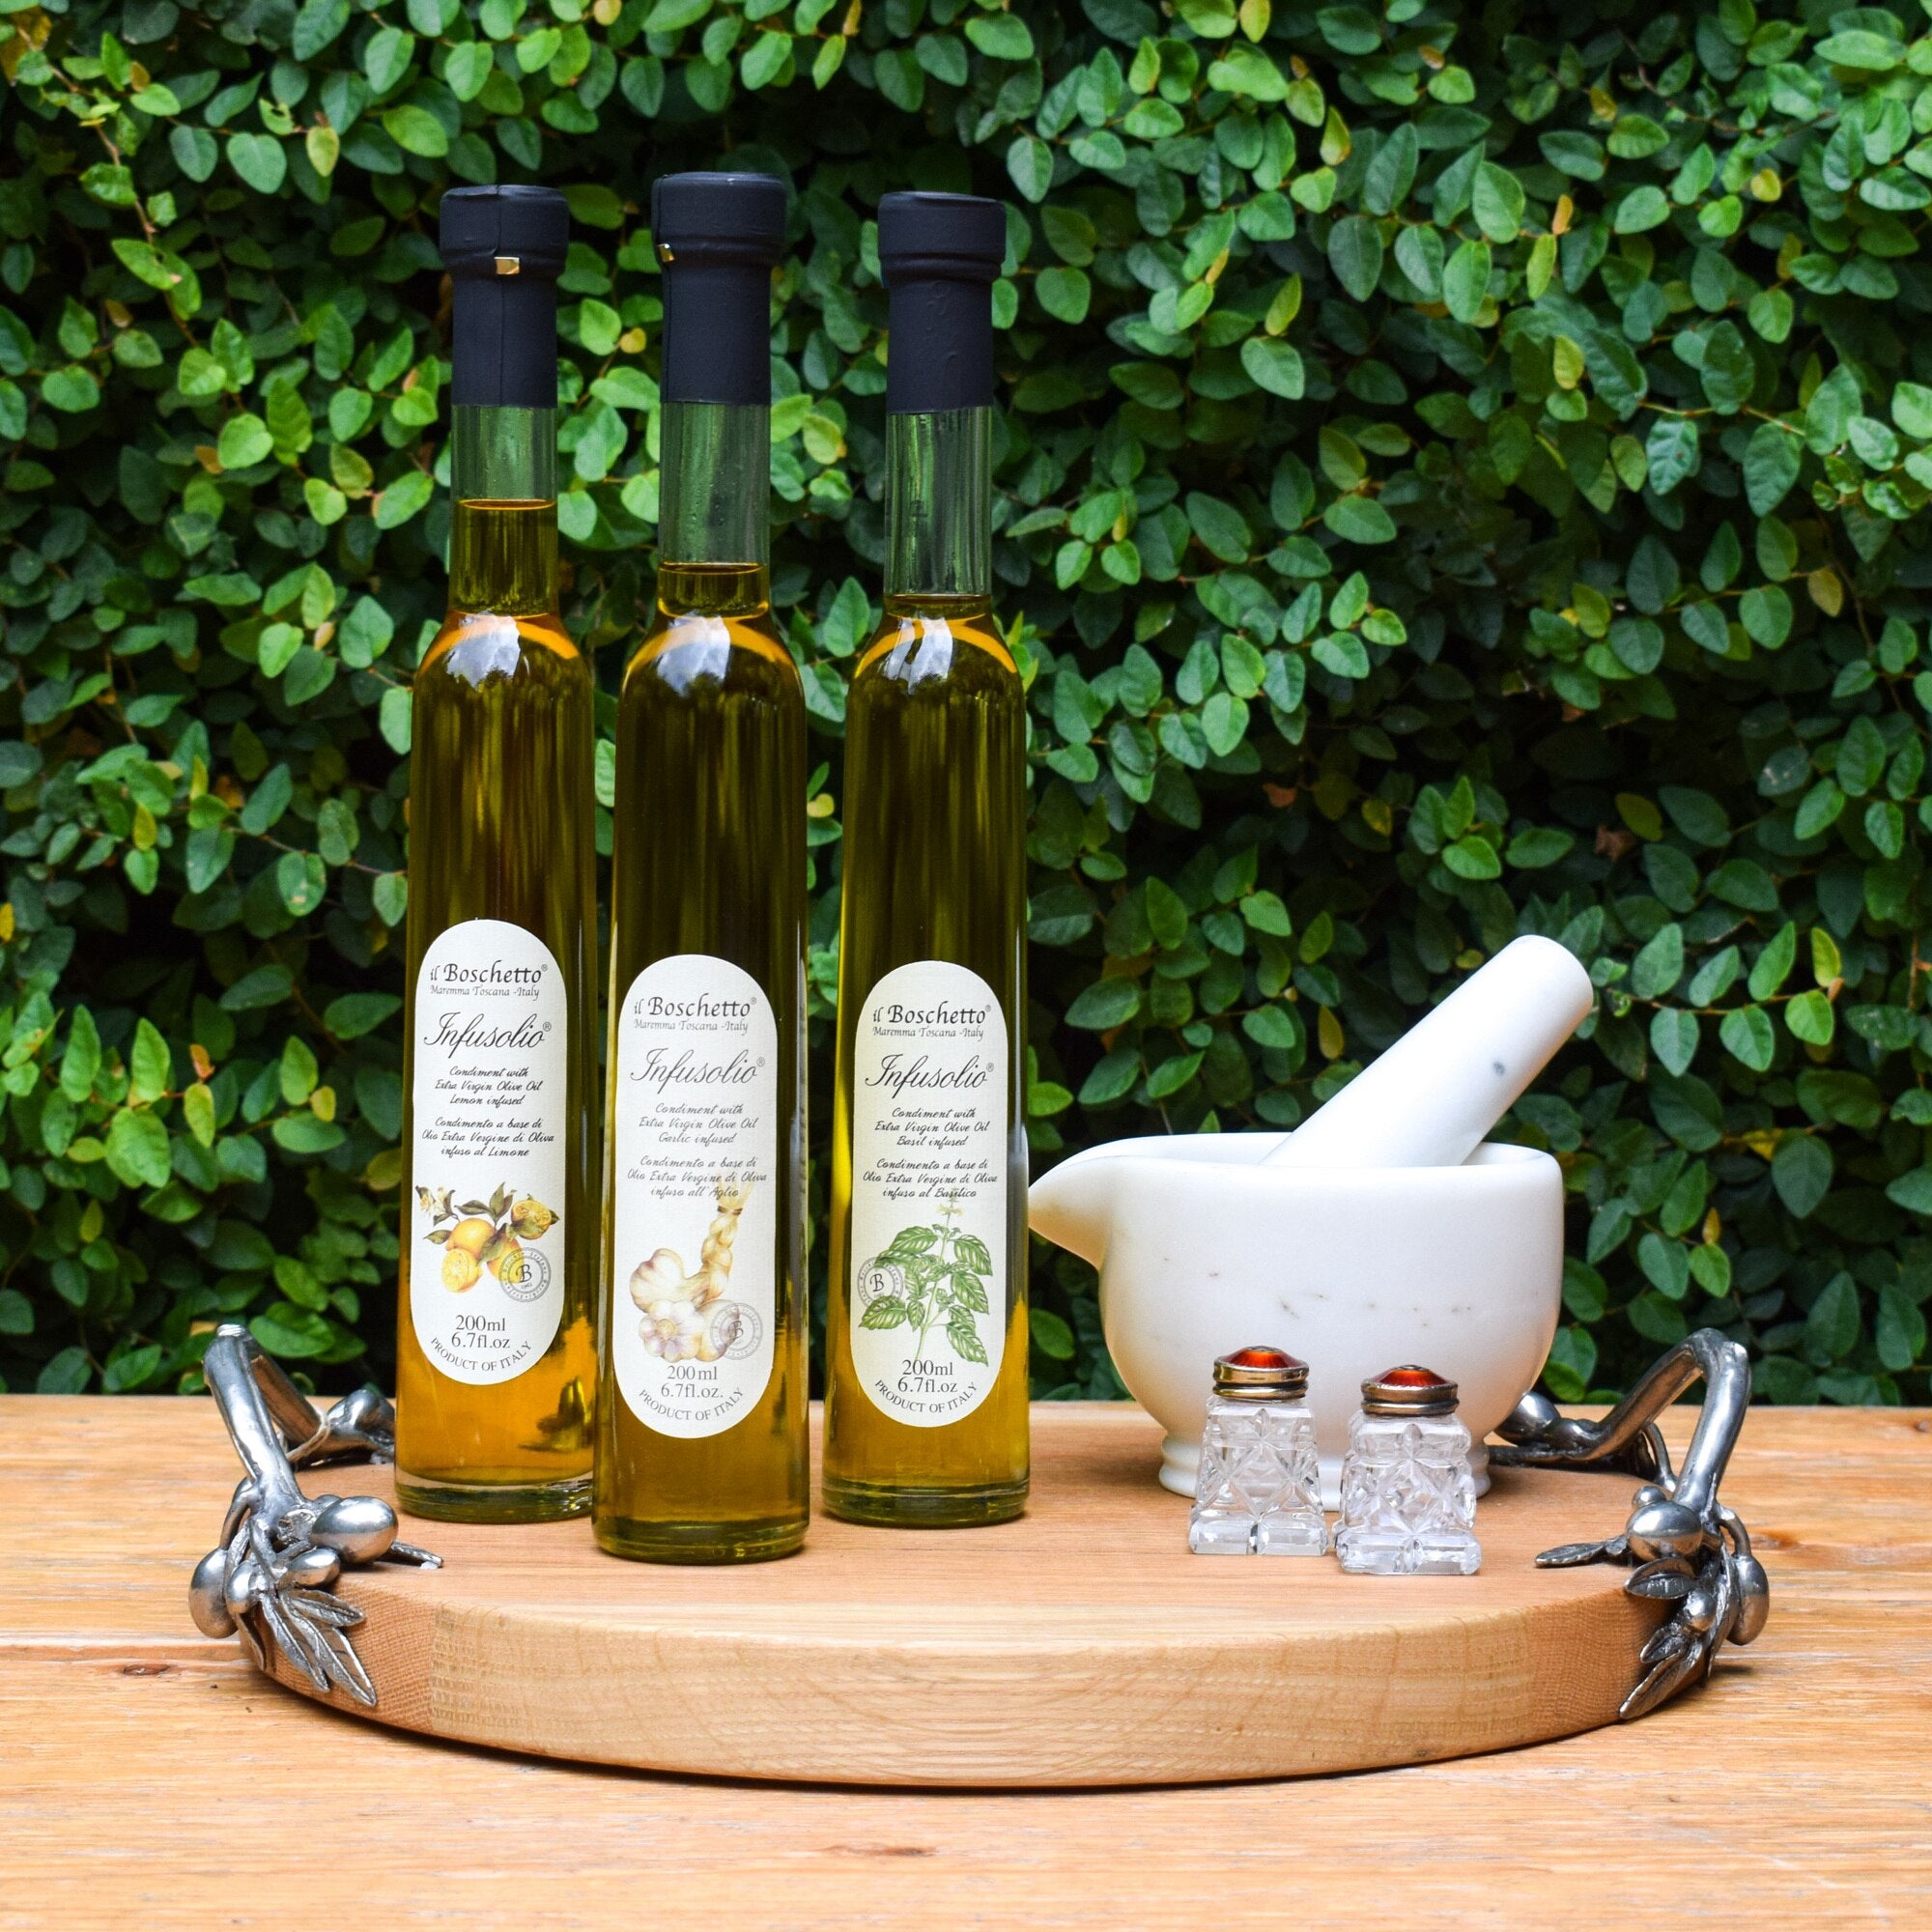 The French Farm - Il Boschetto Lemon Infused Extra Virgin Olive Oil